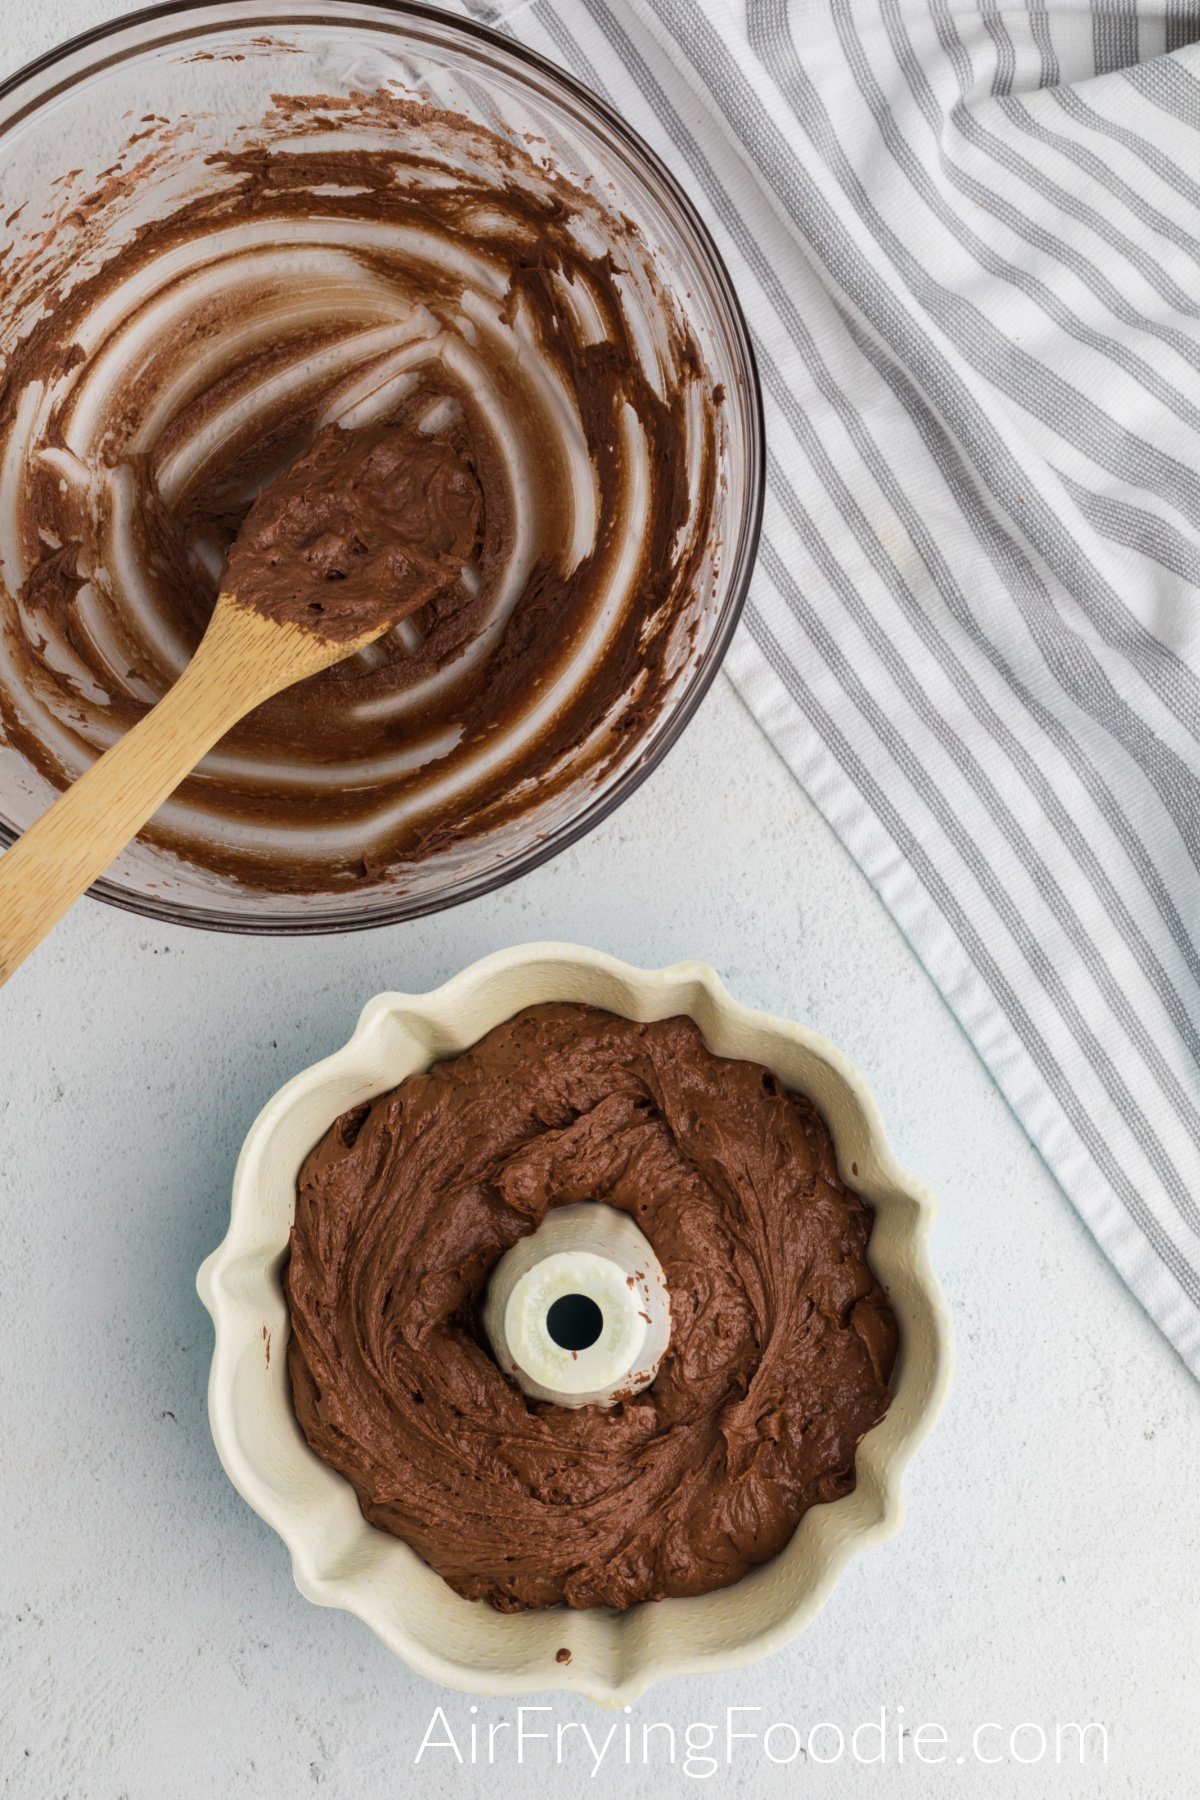 Chocolate cake batter added to the bundt pan.